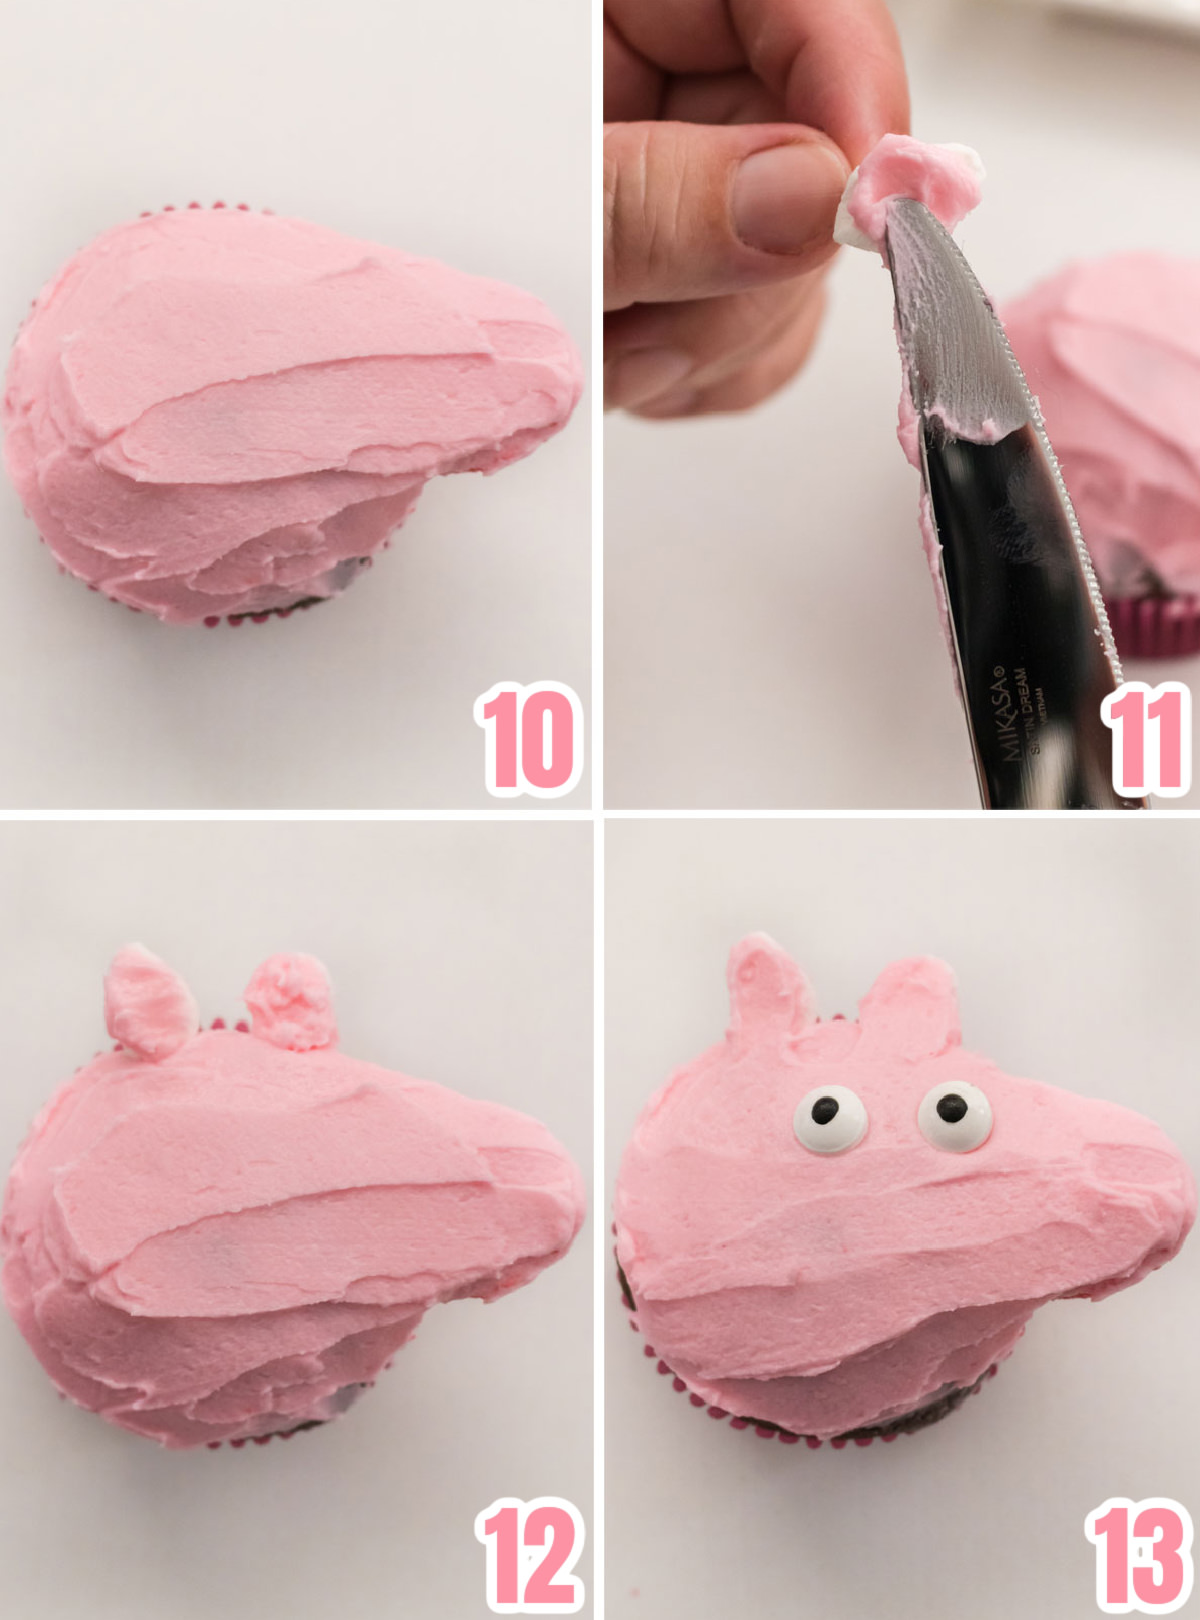 Collage image showing the exact steps on how to assemble the Peppa Pig Cupcakes.